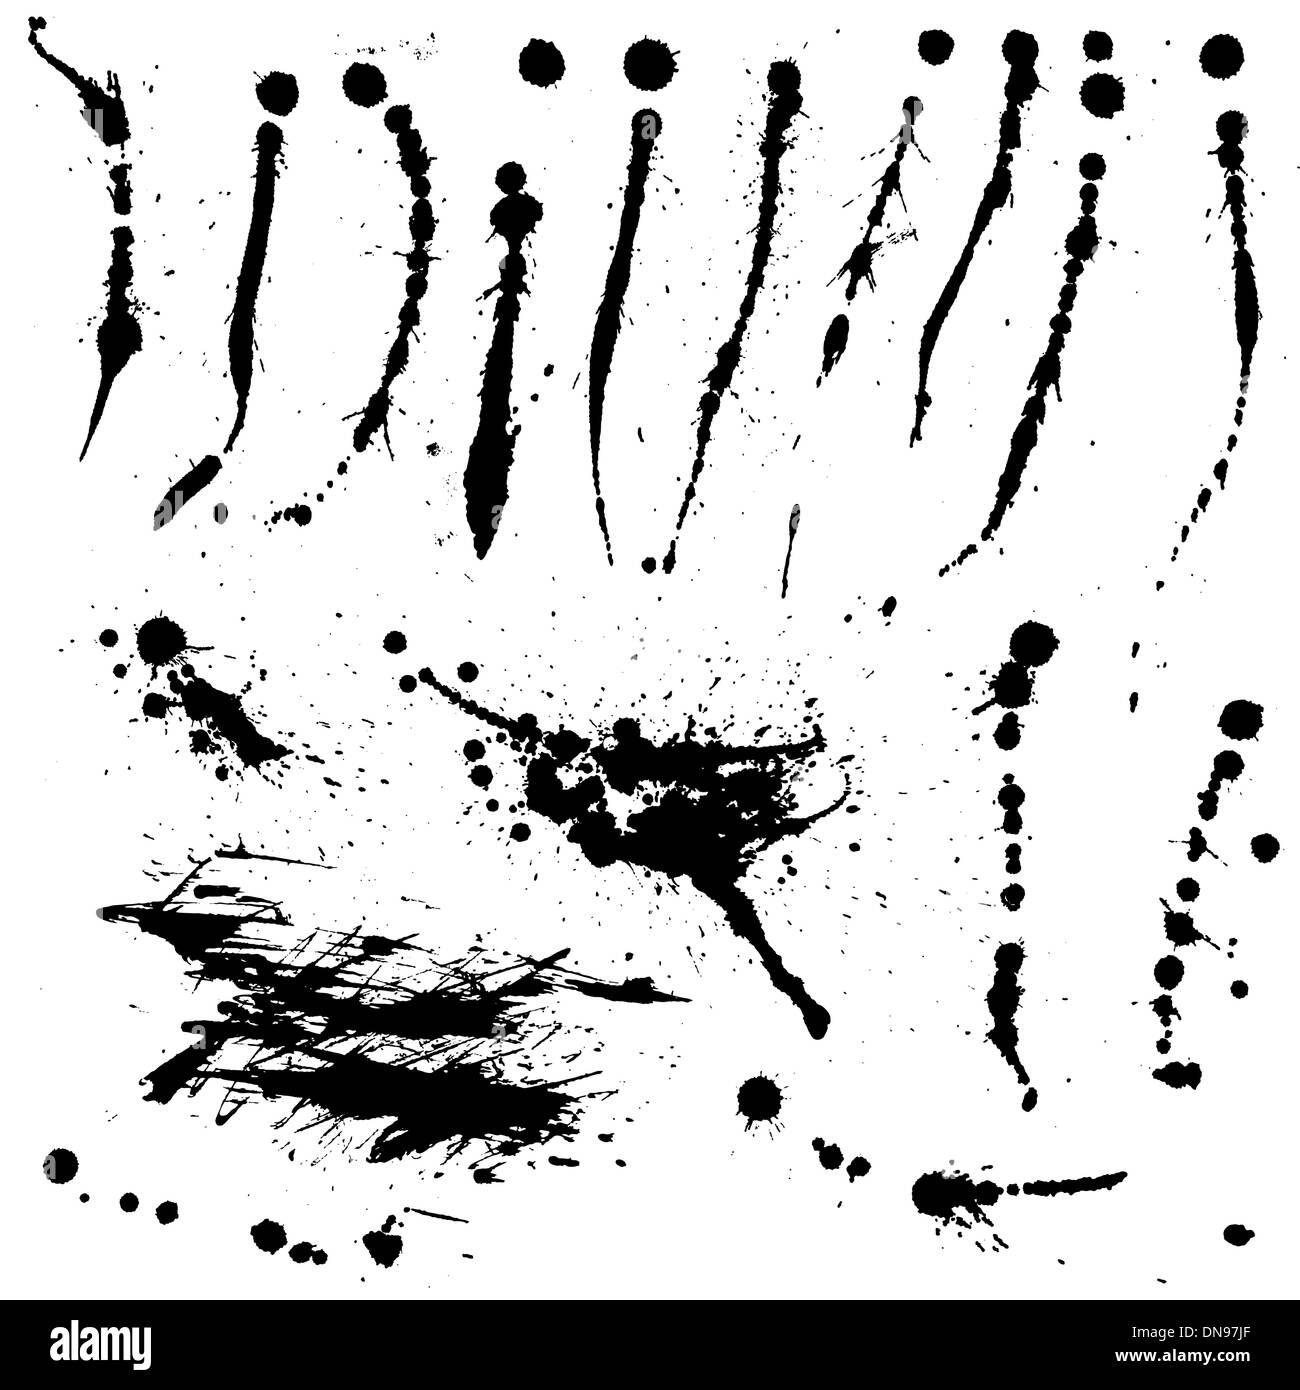 Ink splatter Black and White Stock Photos & Images - Alamy